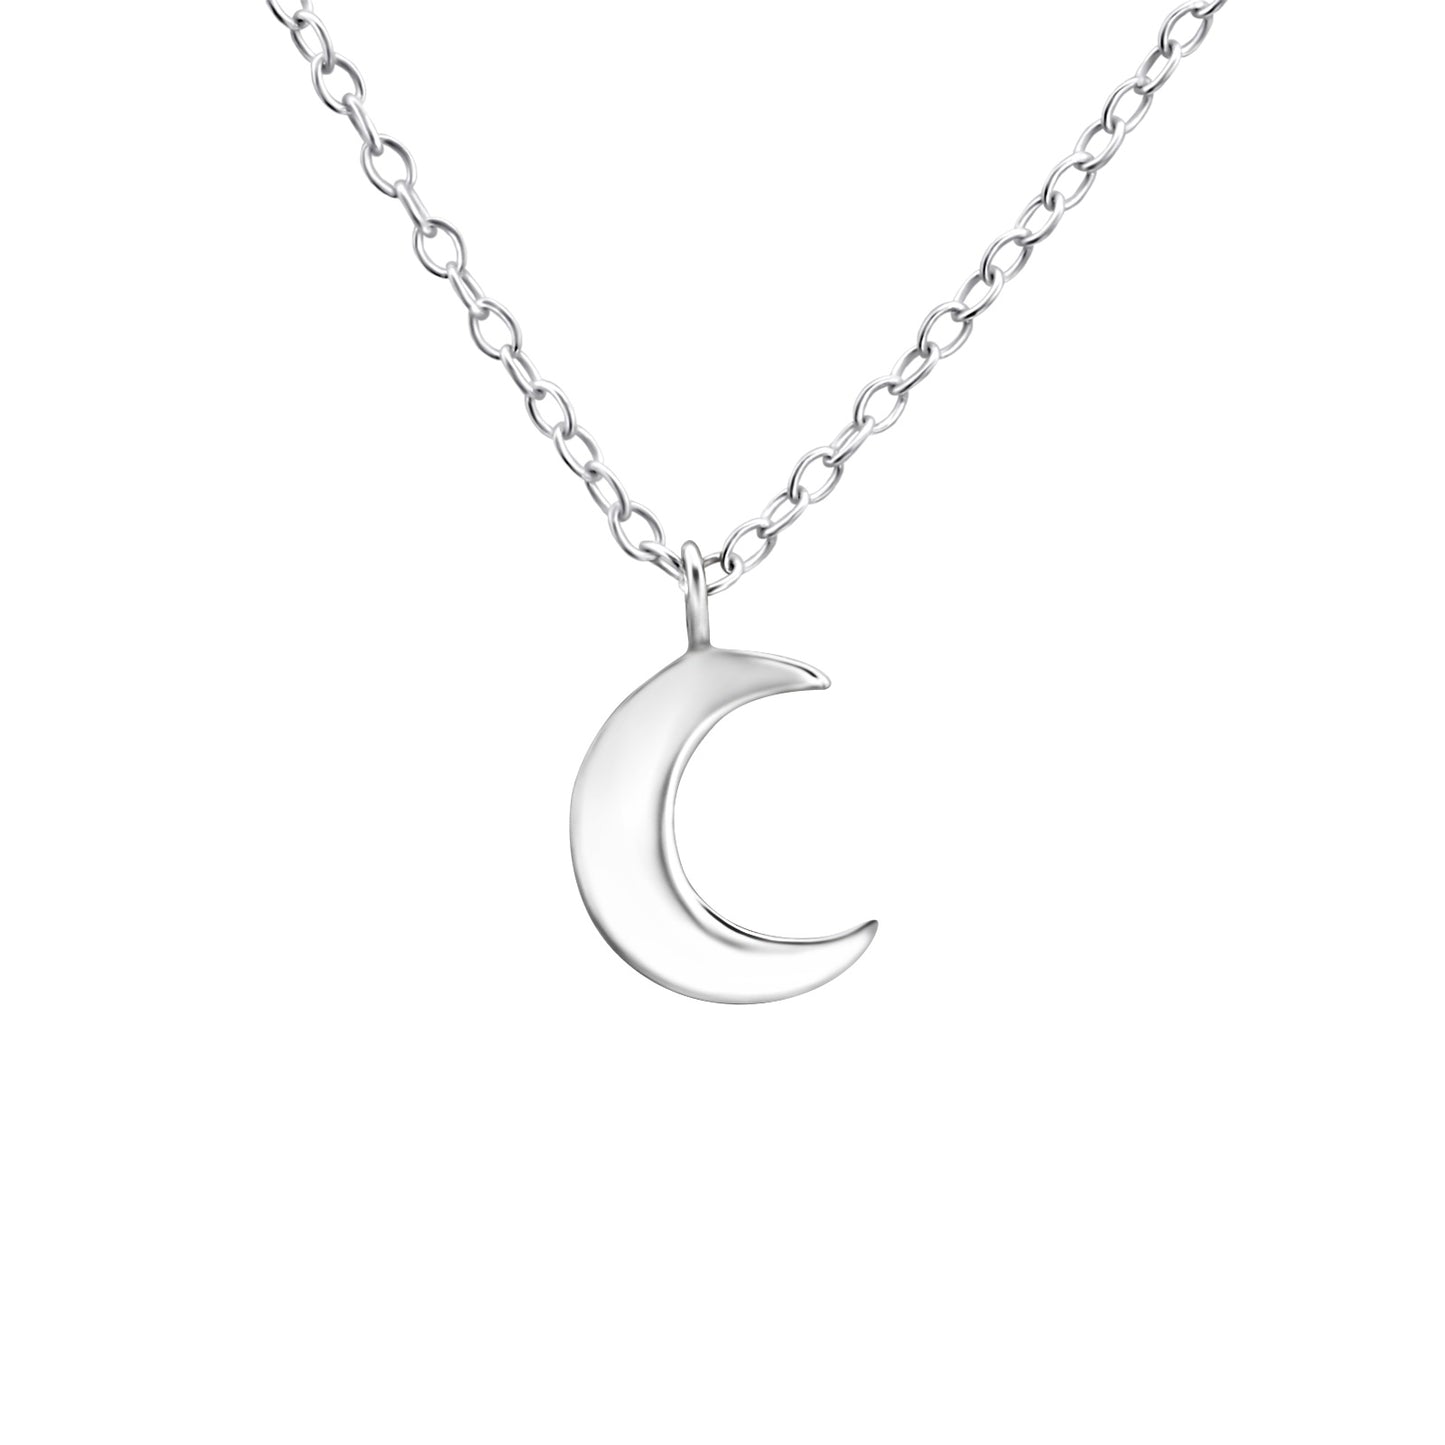 REAL Silver Plated Half Moon Necklace - Sterling Silver 45cm Chain